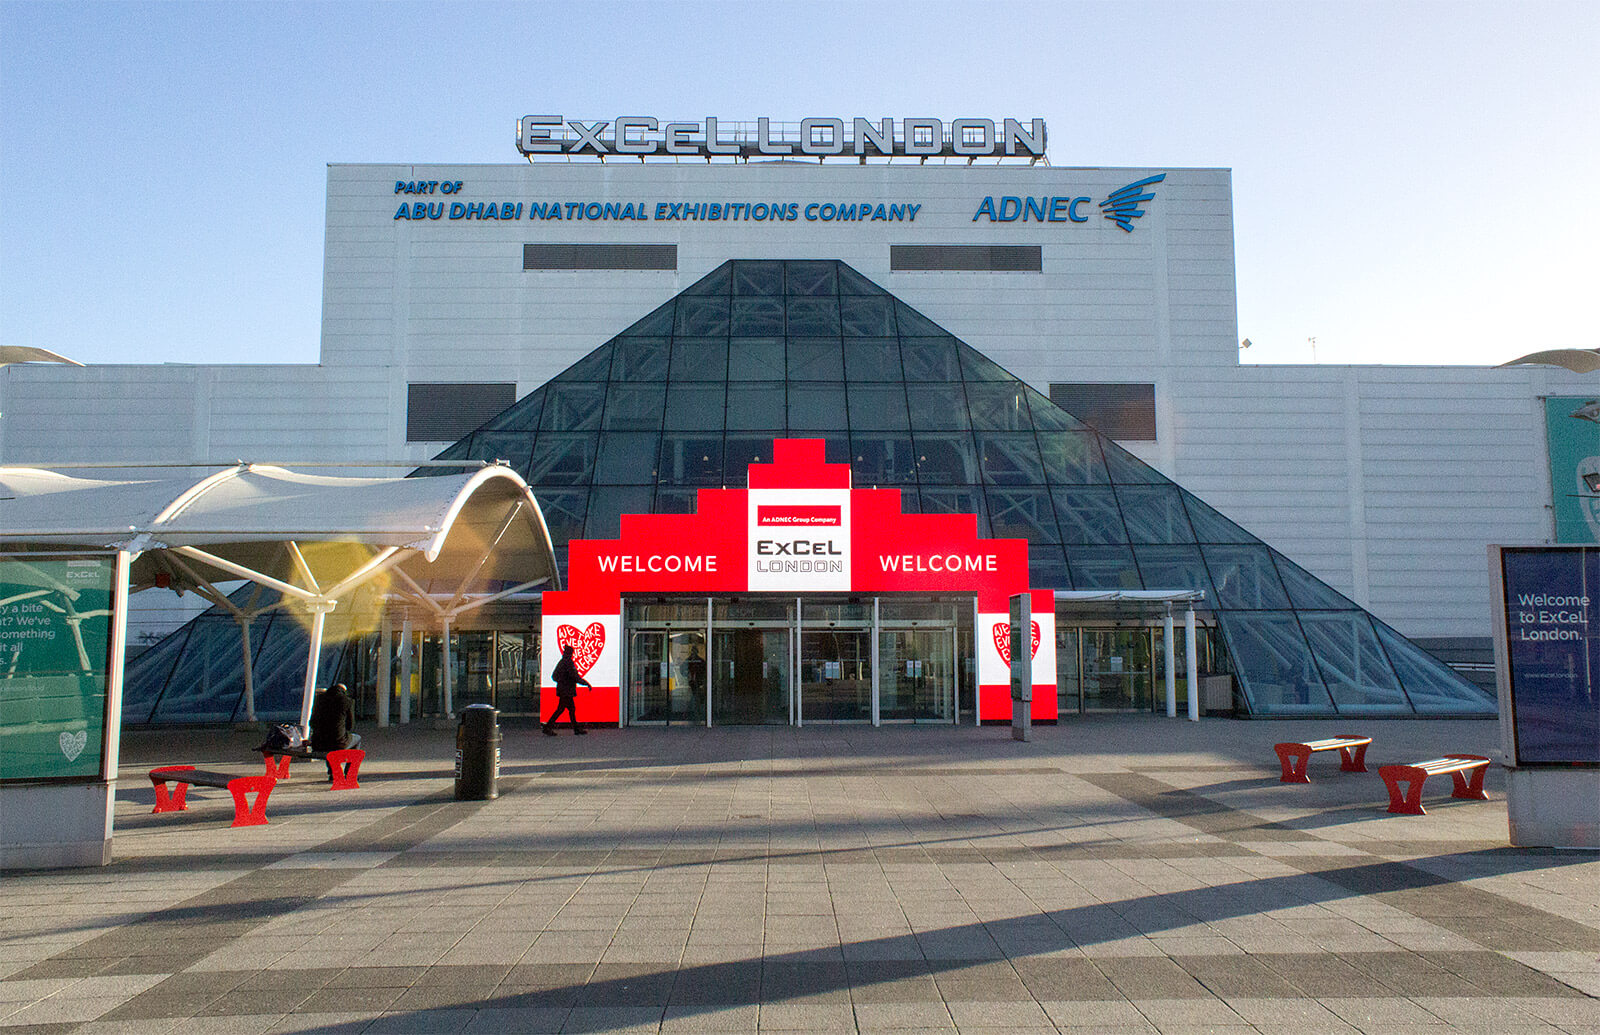 ExCeL (Exhibition Centre London) is an exhibitions and international convention centre in Custom House, East London.